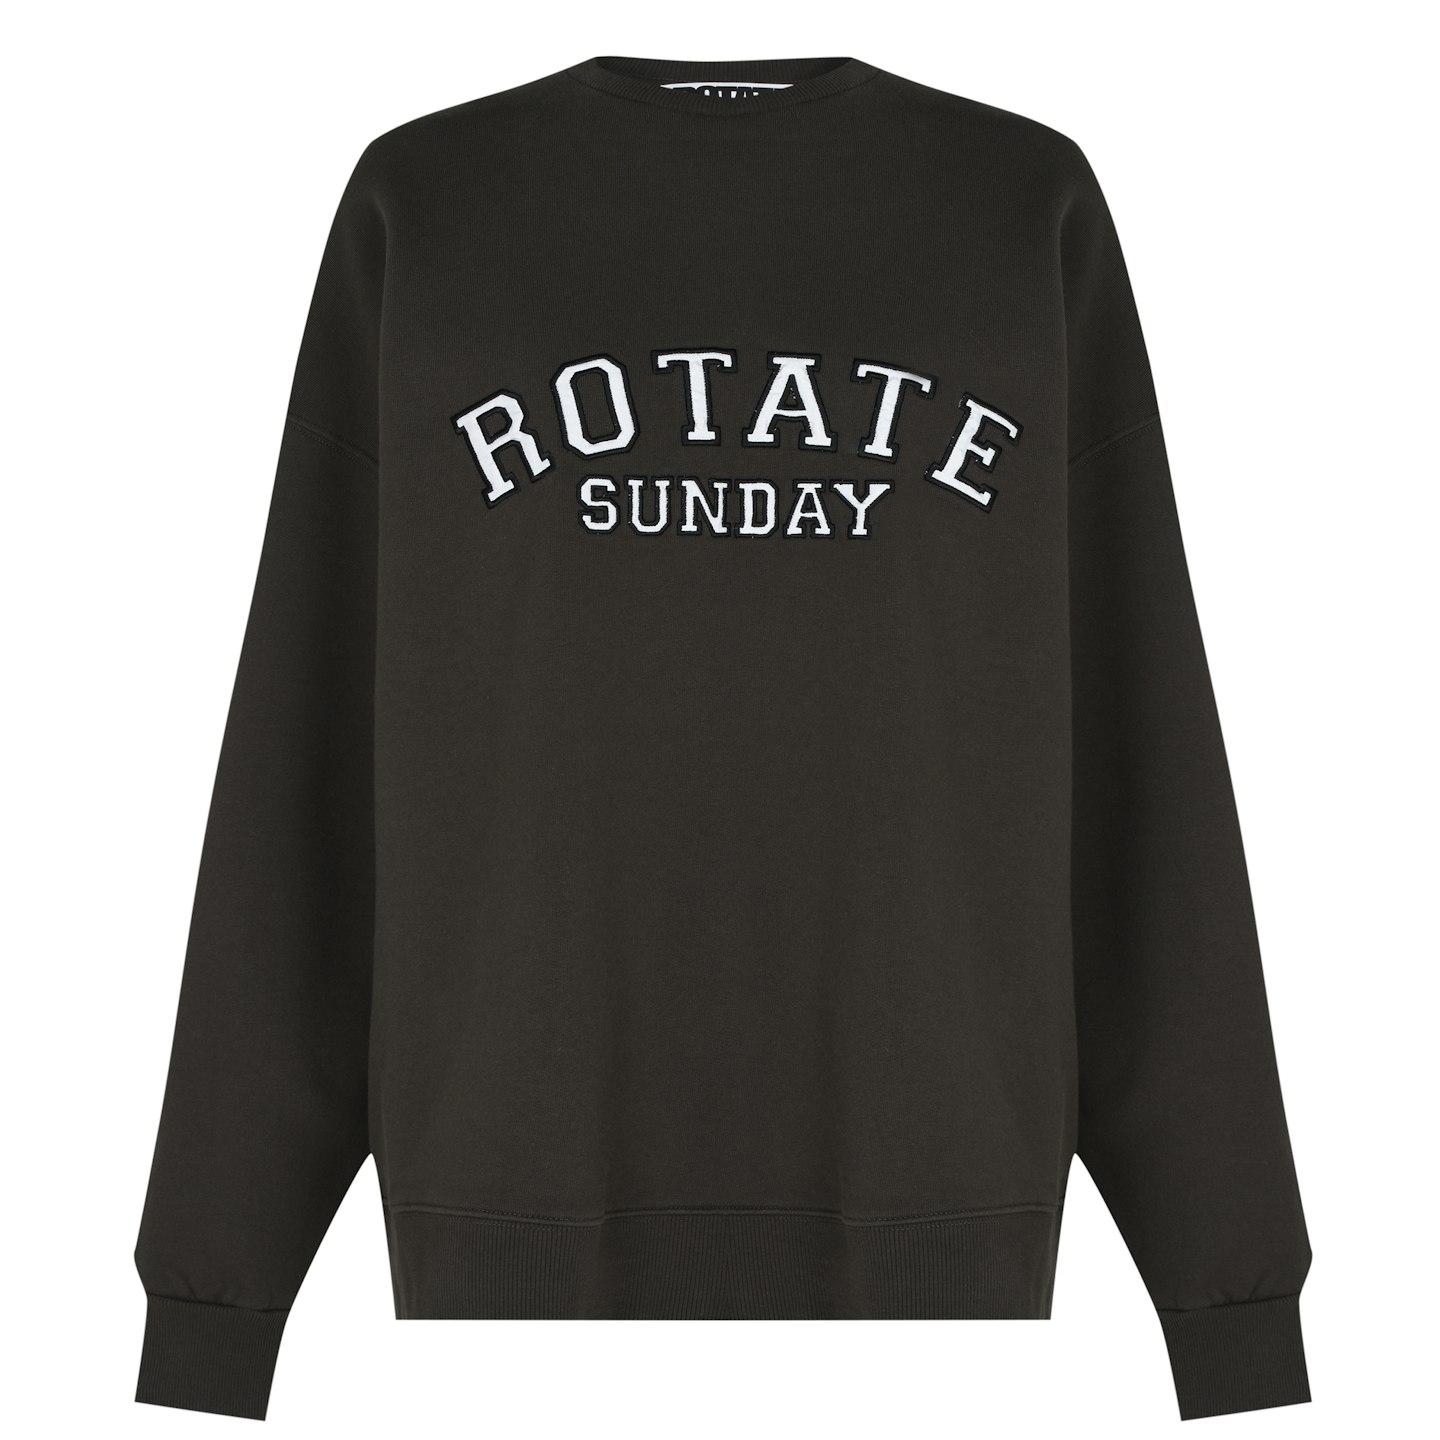 The Best Varsity Pieces - Rotate Sunday